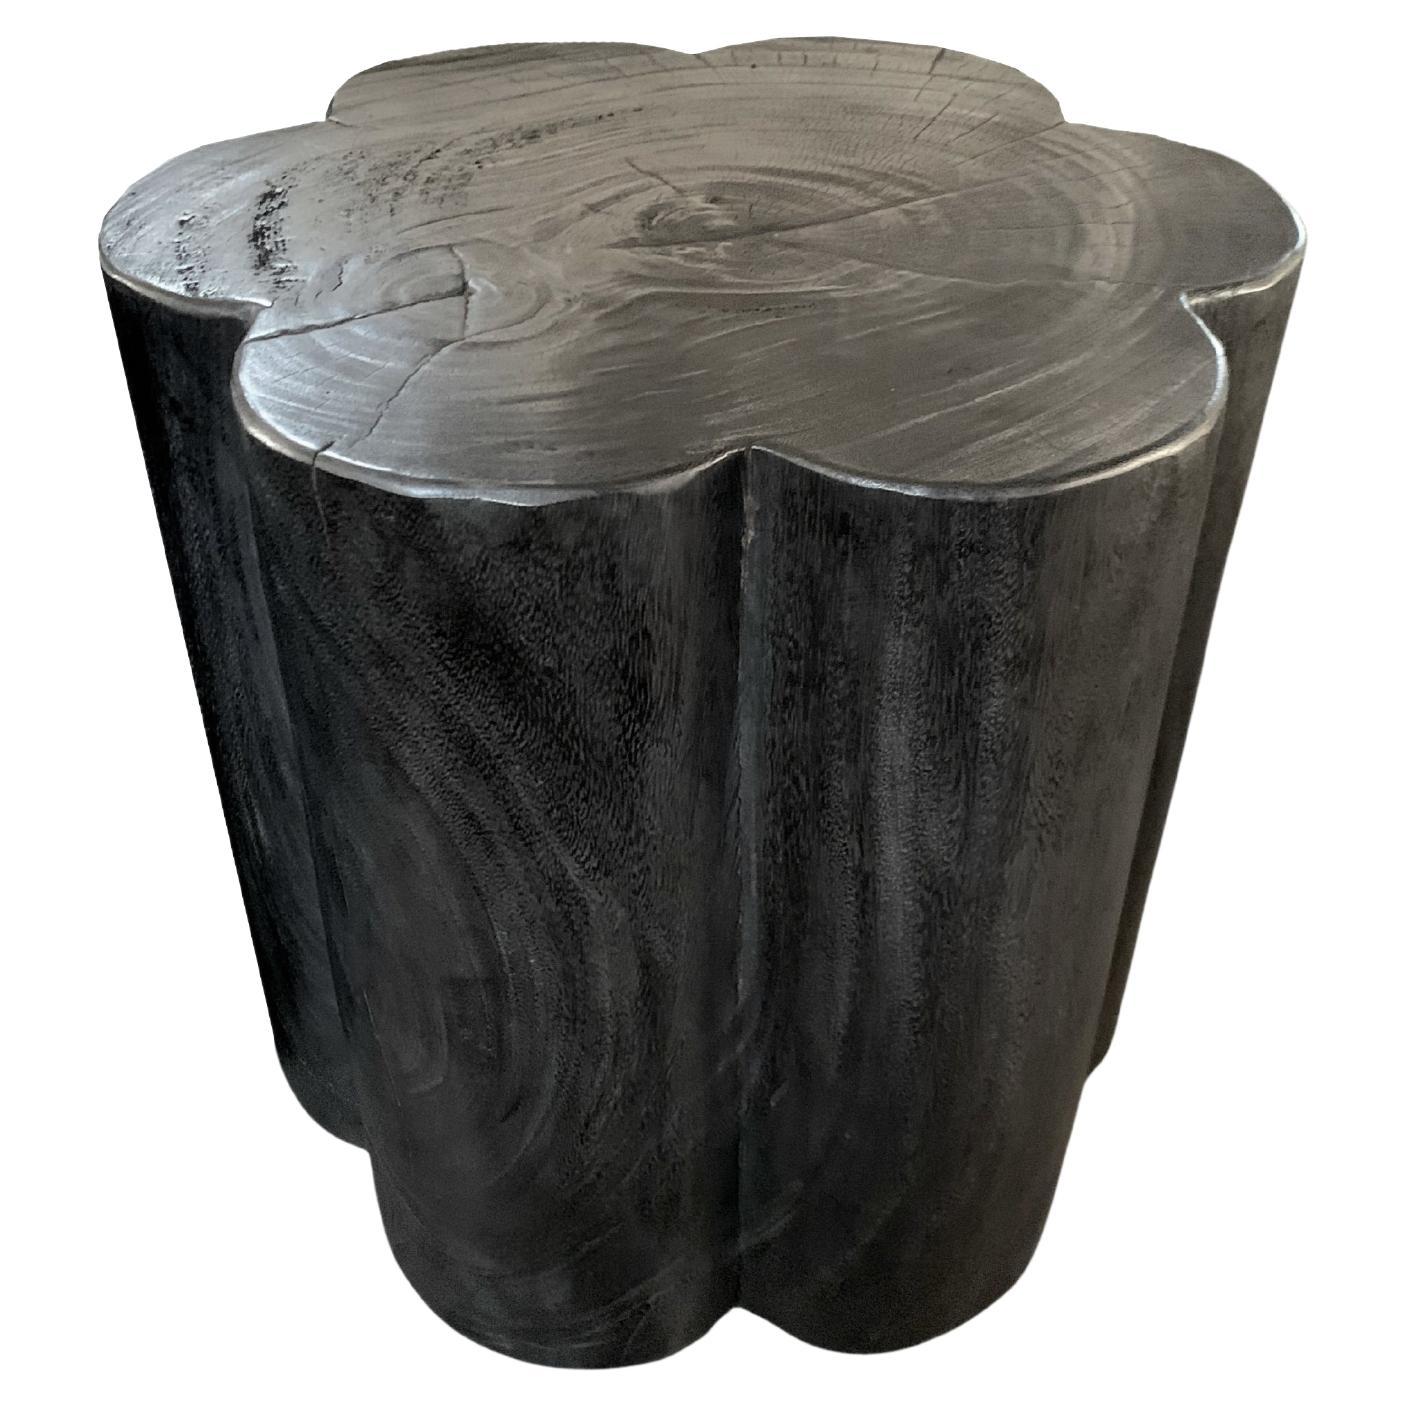 Flower Shaped Side Table Solid Mango Wood Burnt Finish Modern Organic For Sale